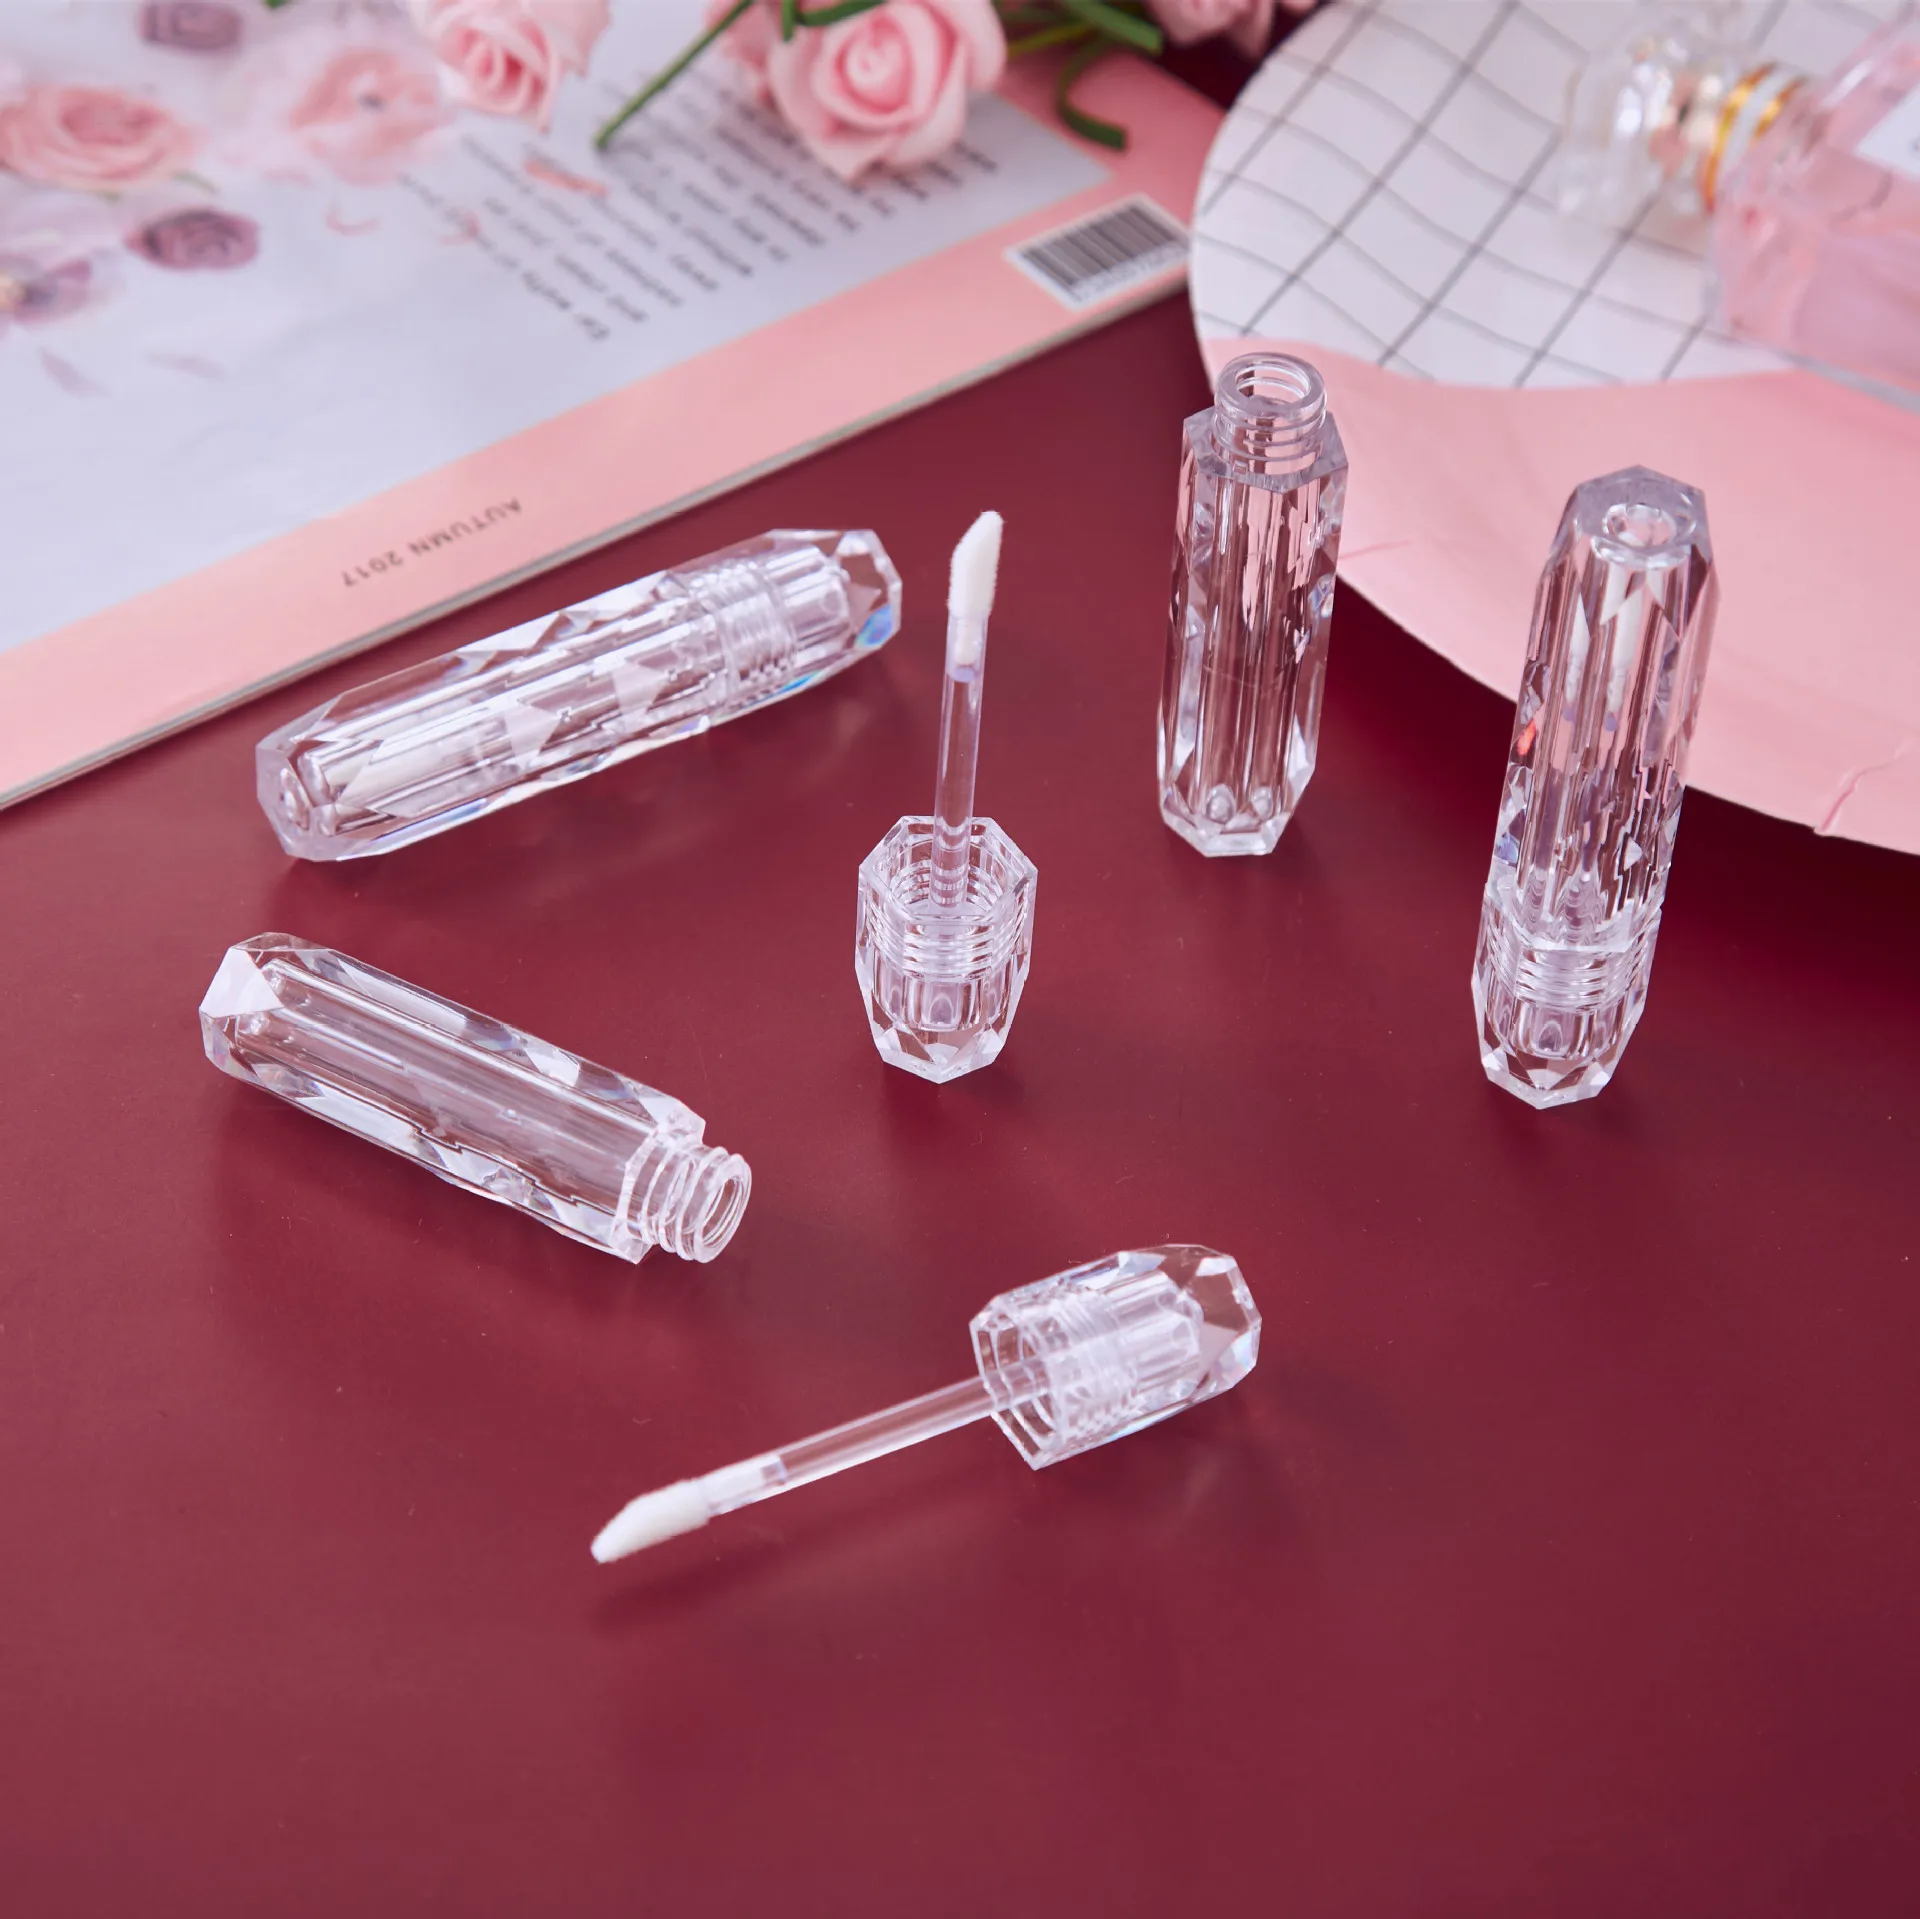 2.5ml Diamond Clear Plastic Lip Gloss Empty Tube Cosmetic LipGloss Container Packaging seleadlab 1 5 10m clear white ptfe tube id 2 3mm od4mm for 3d printer parts bambu lab x1c p1p p1s voron 2 4 trident